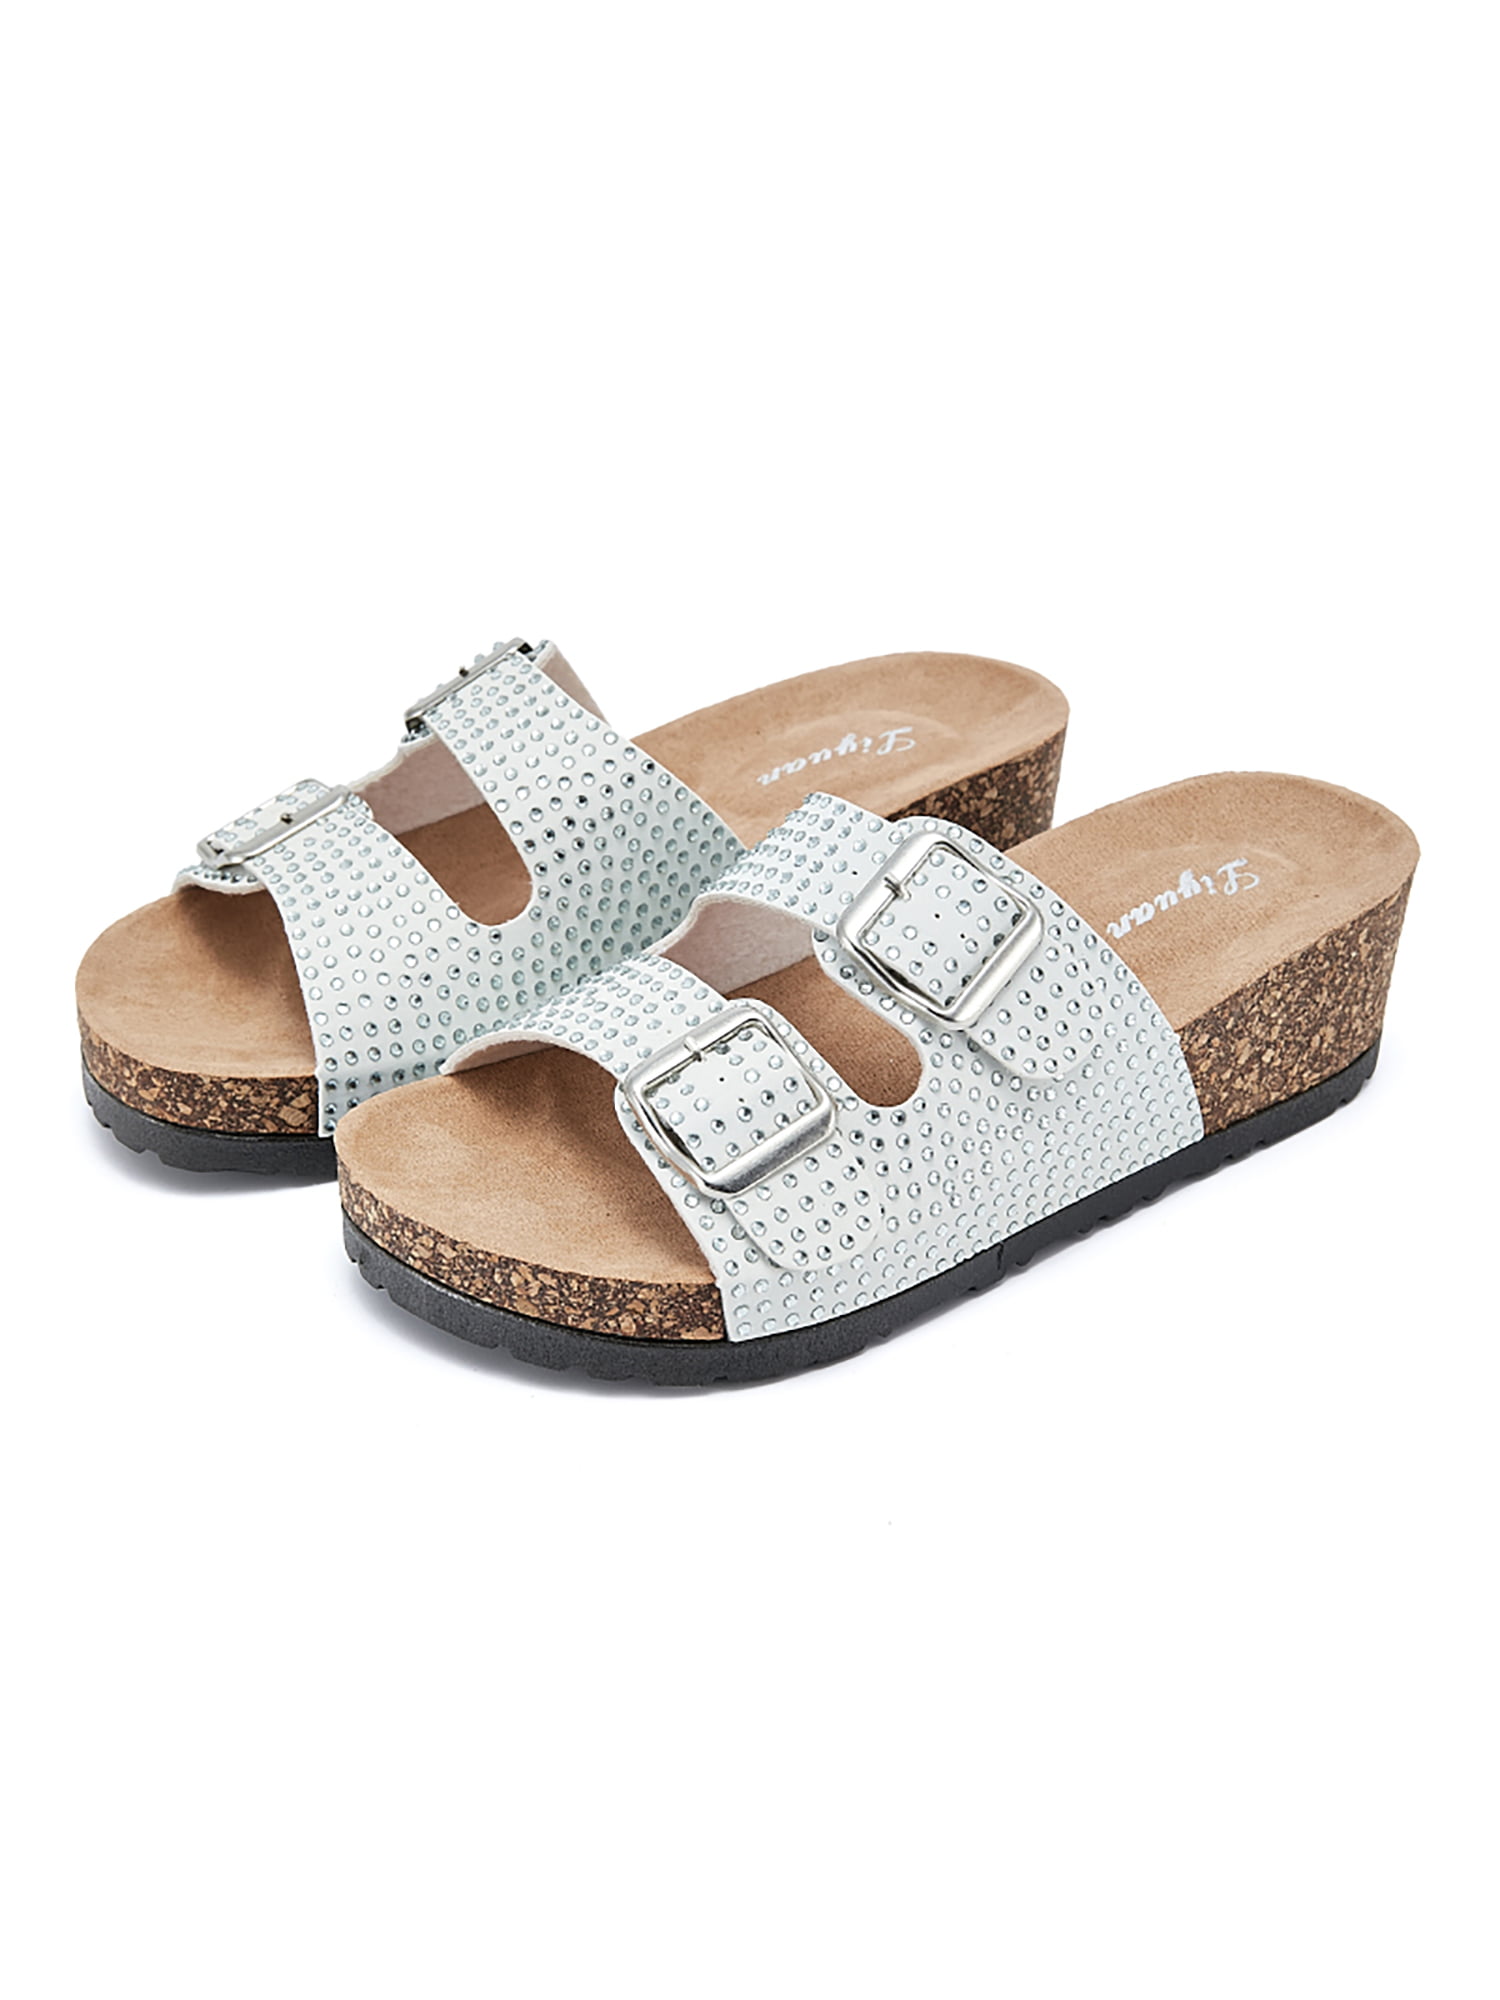 Details about   Womens Ladies Sliders Flat Slip On Buckle Slides Summer Sandals Holiday Mules Sz 